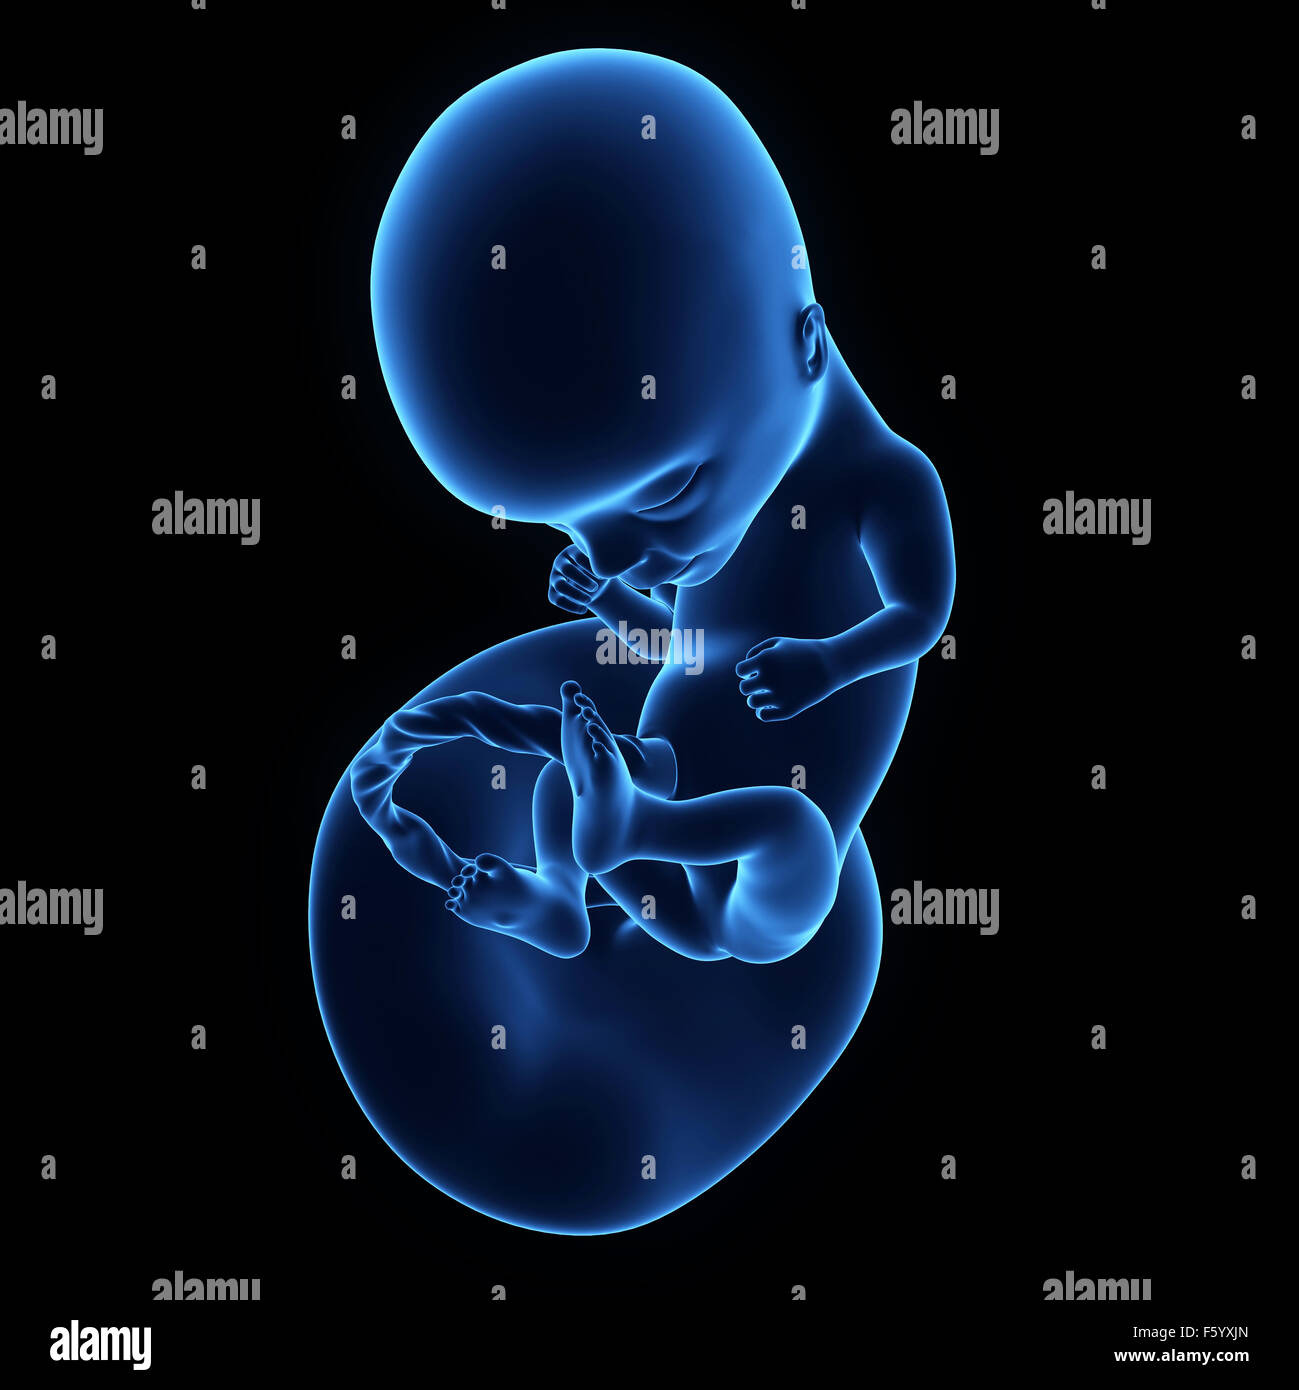 medically accurate illustration of a human fetus week 14 Stock Photo